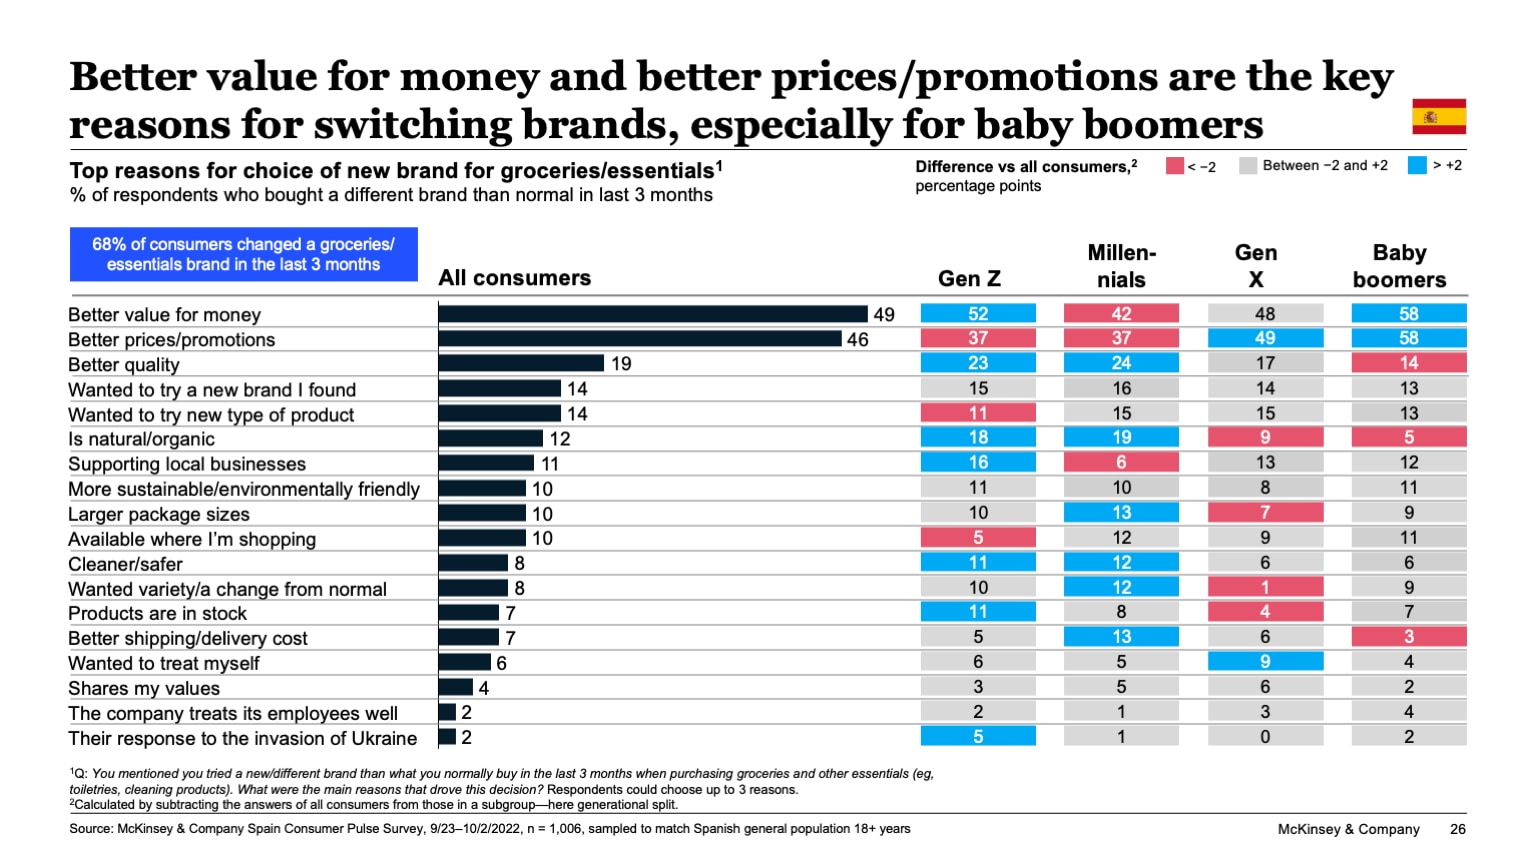 Better value for money and better prices/promotions are the key reasons for switching brands, especially for baby boomers